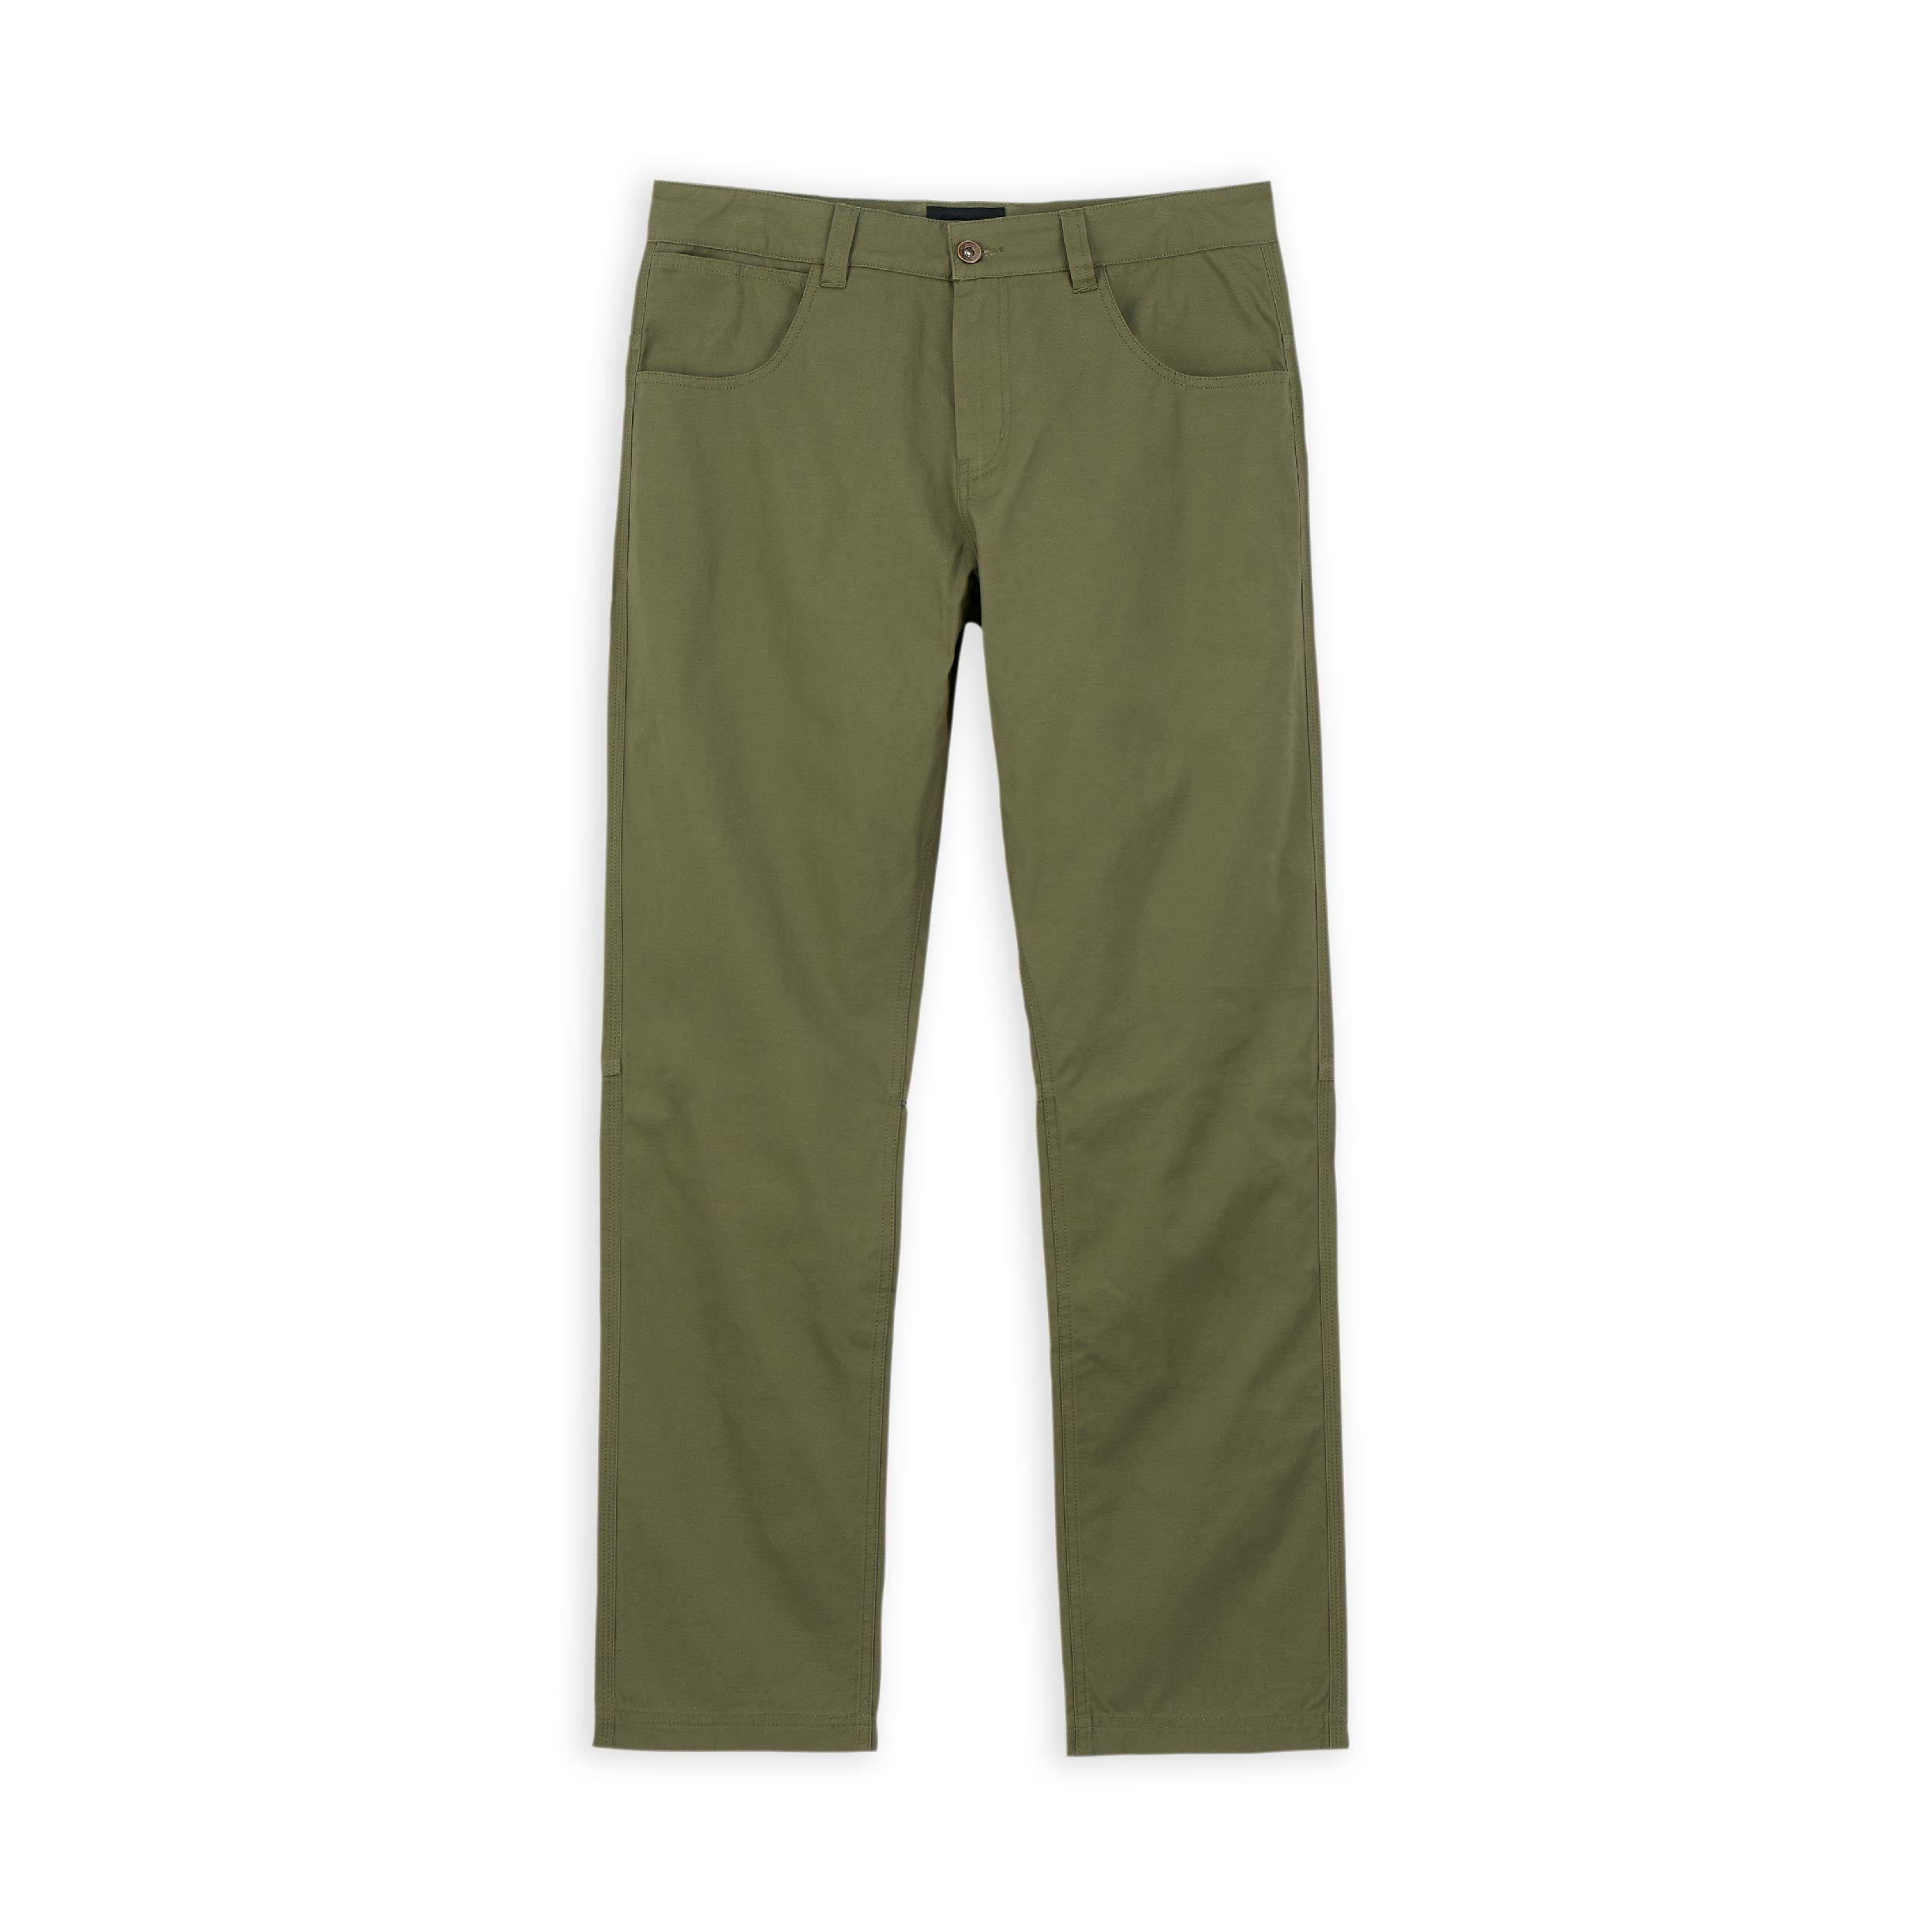 M's All-rounder Pants